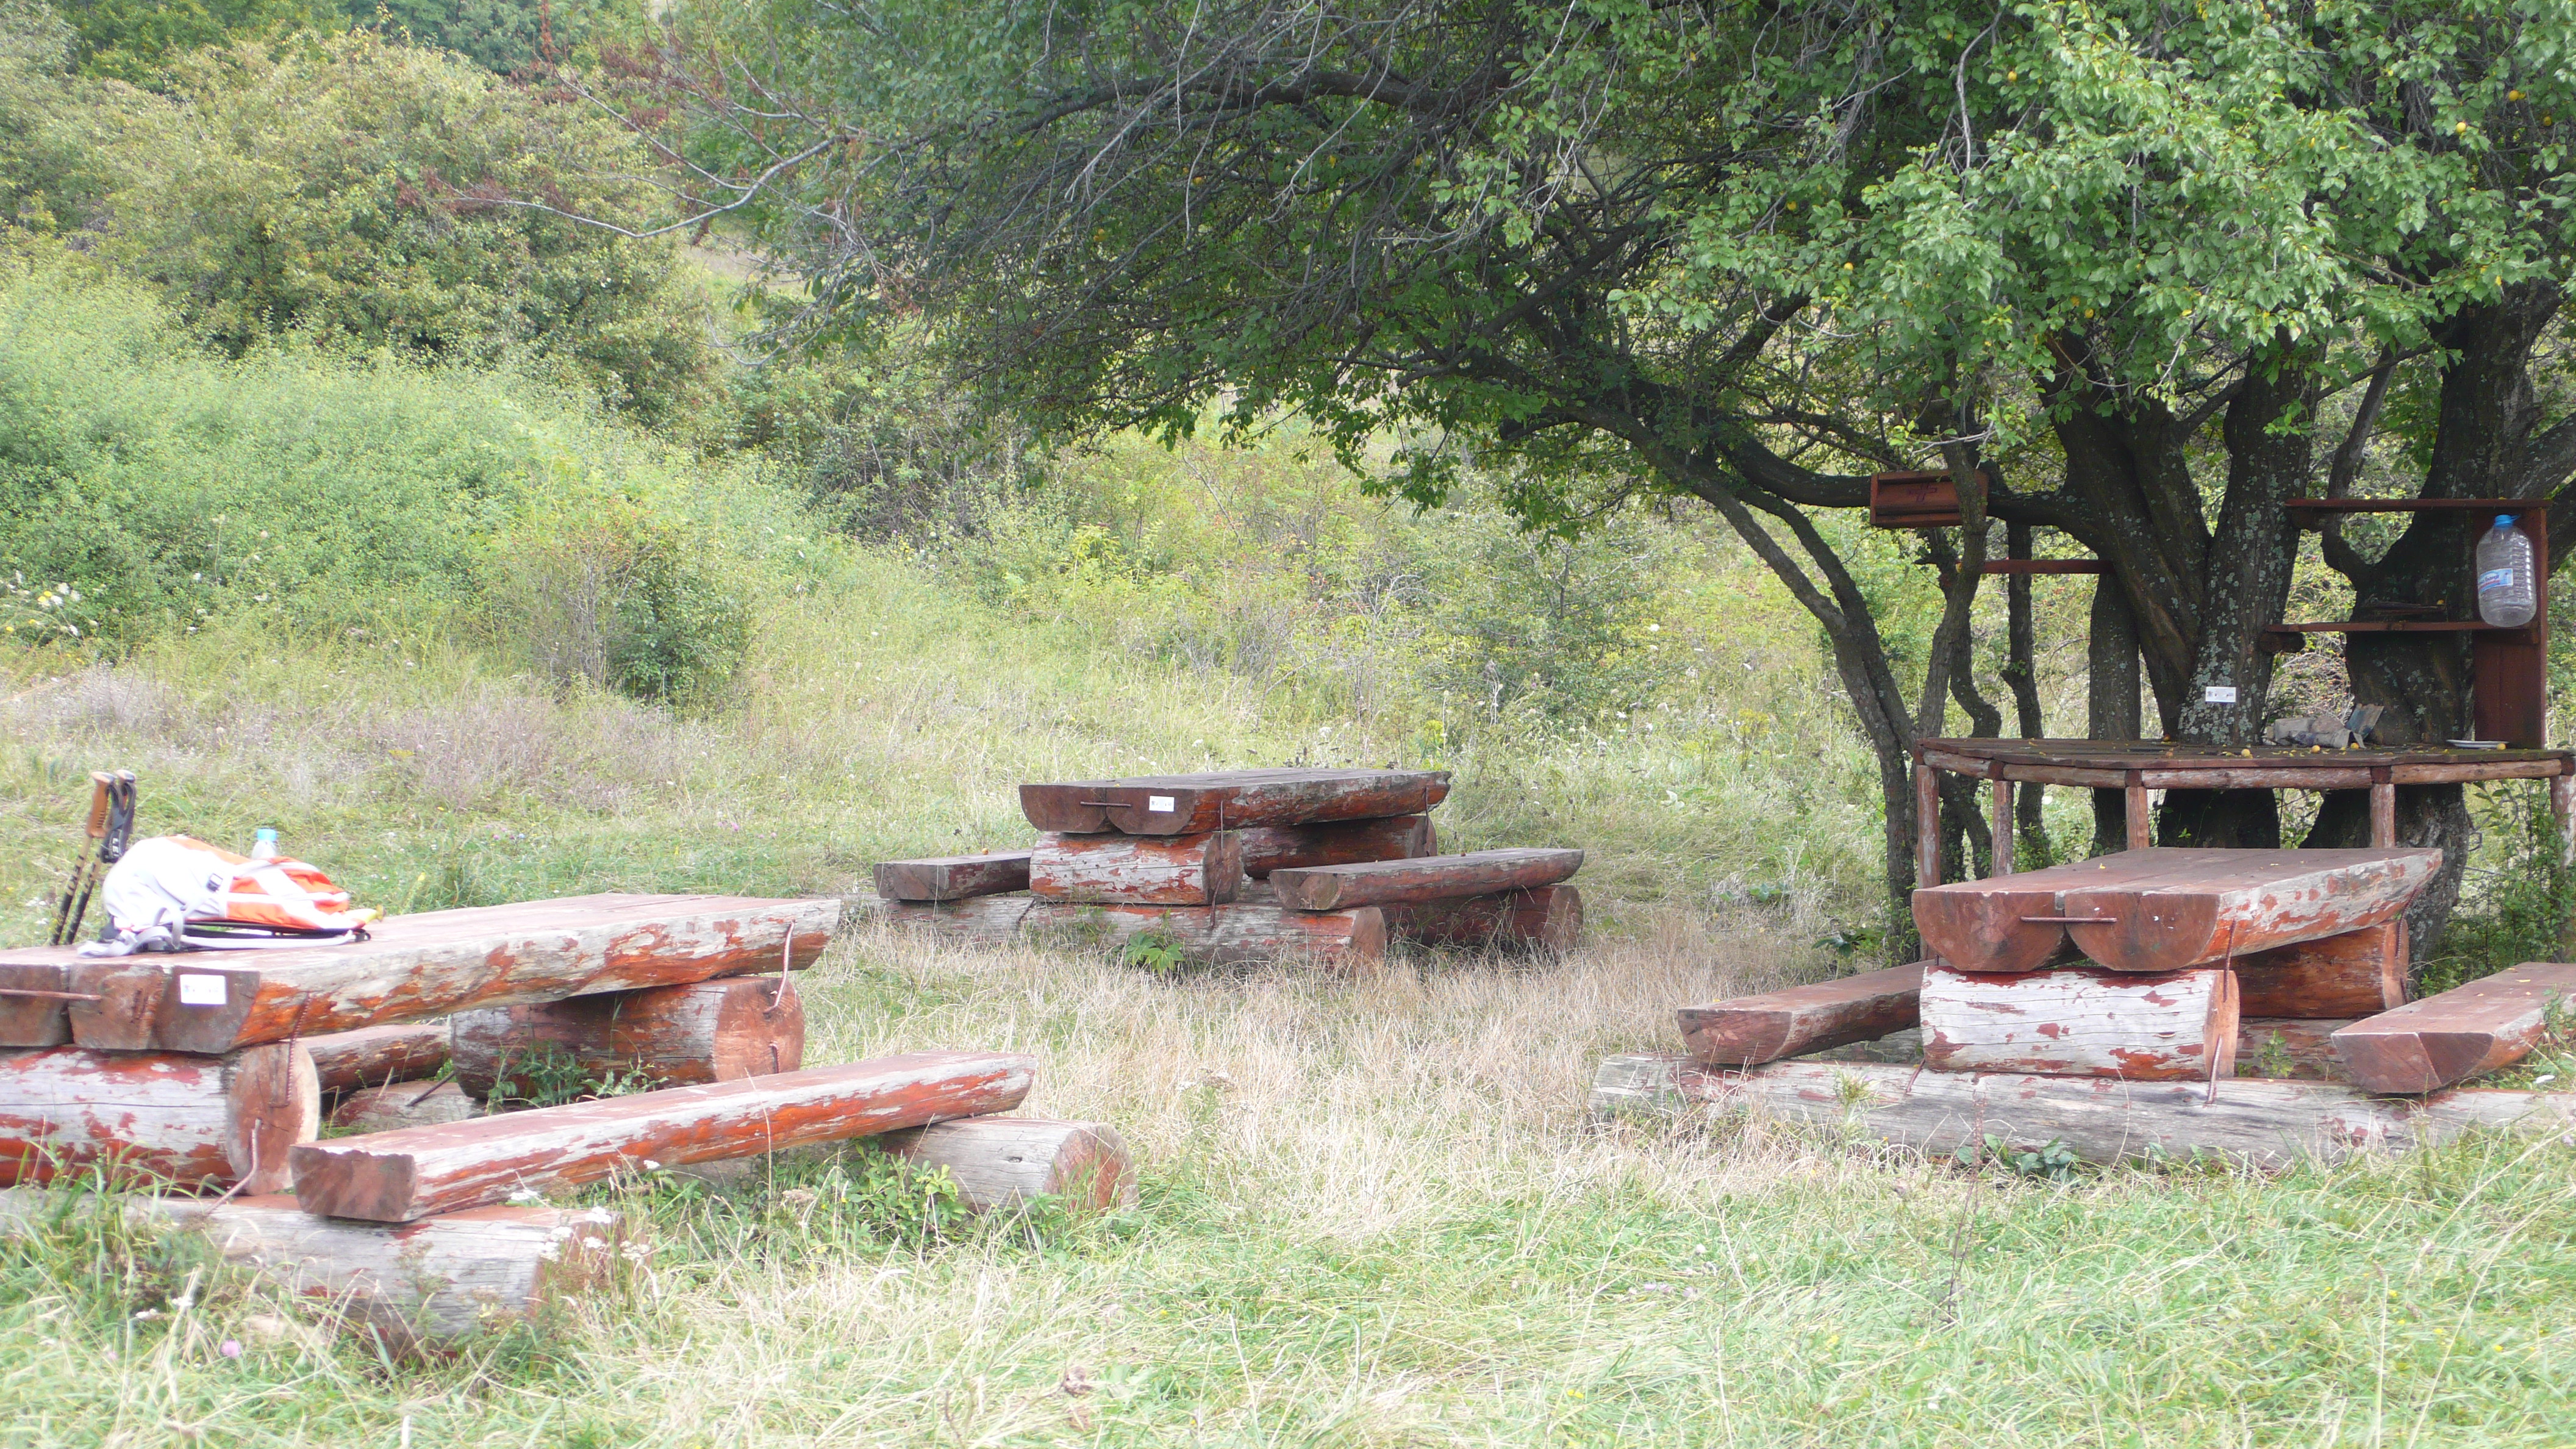 2nd picnic area